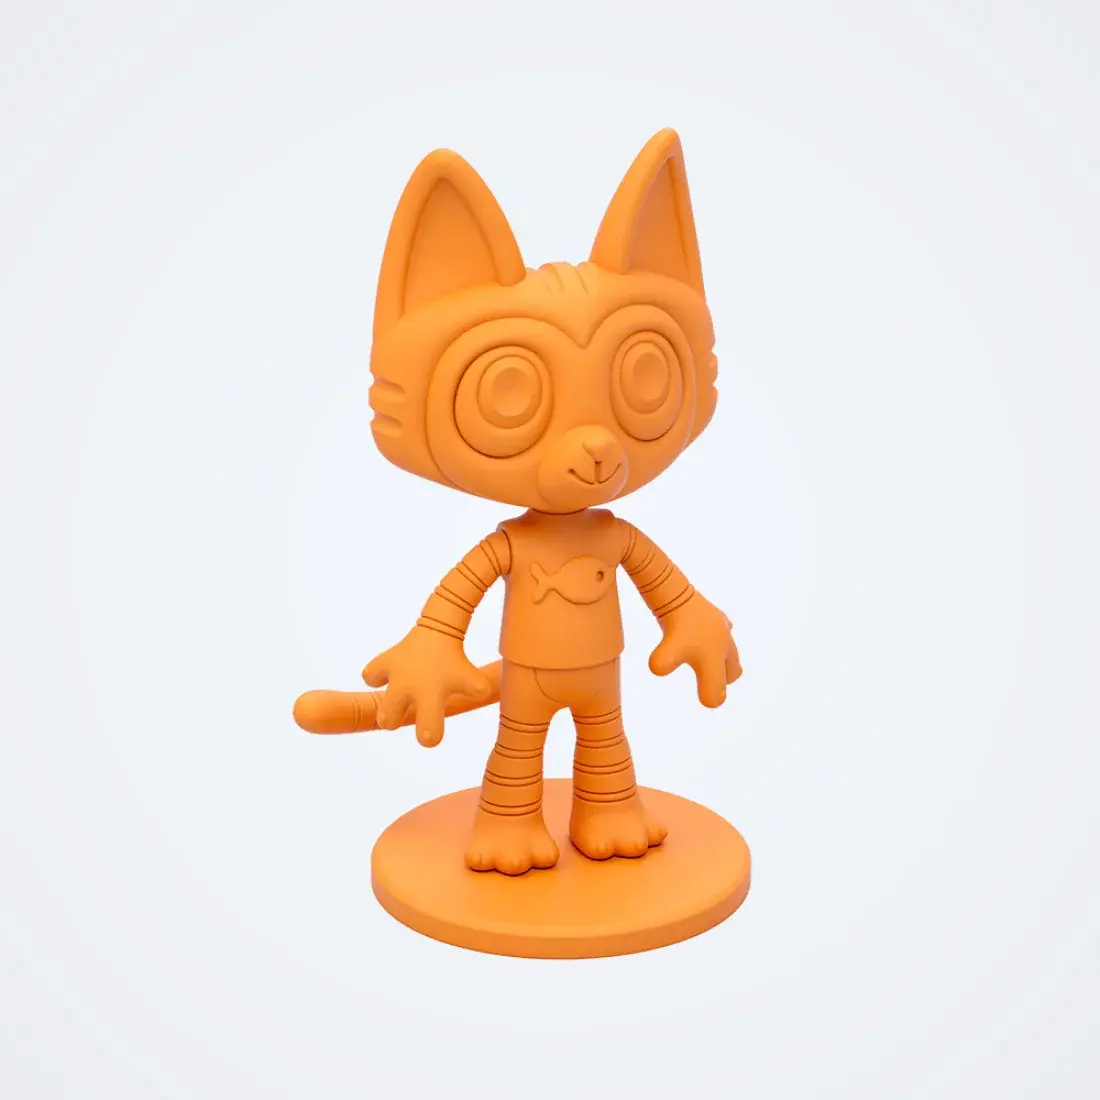 Toogle toy 3D character 5 by devabit